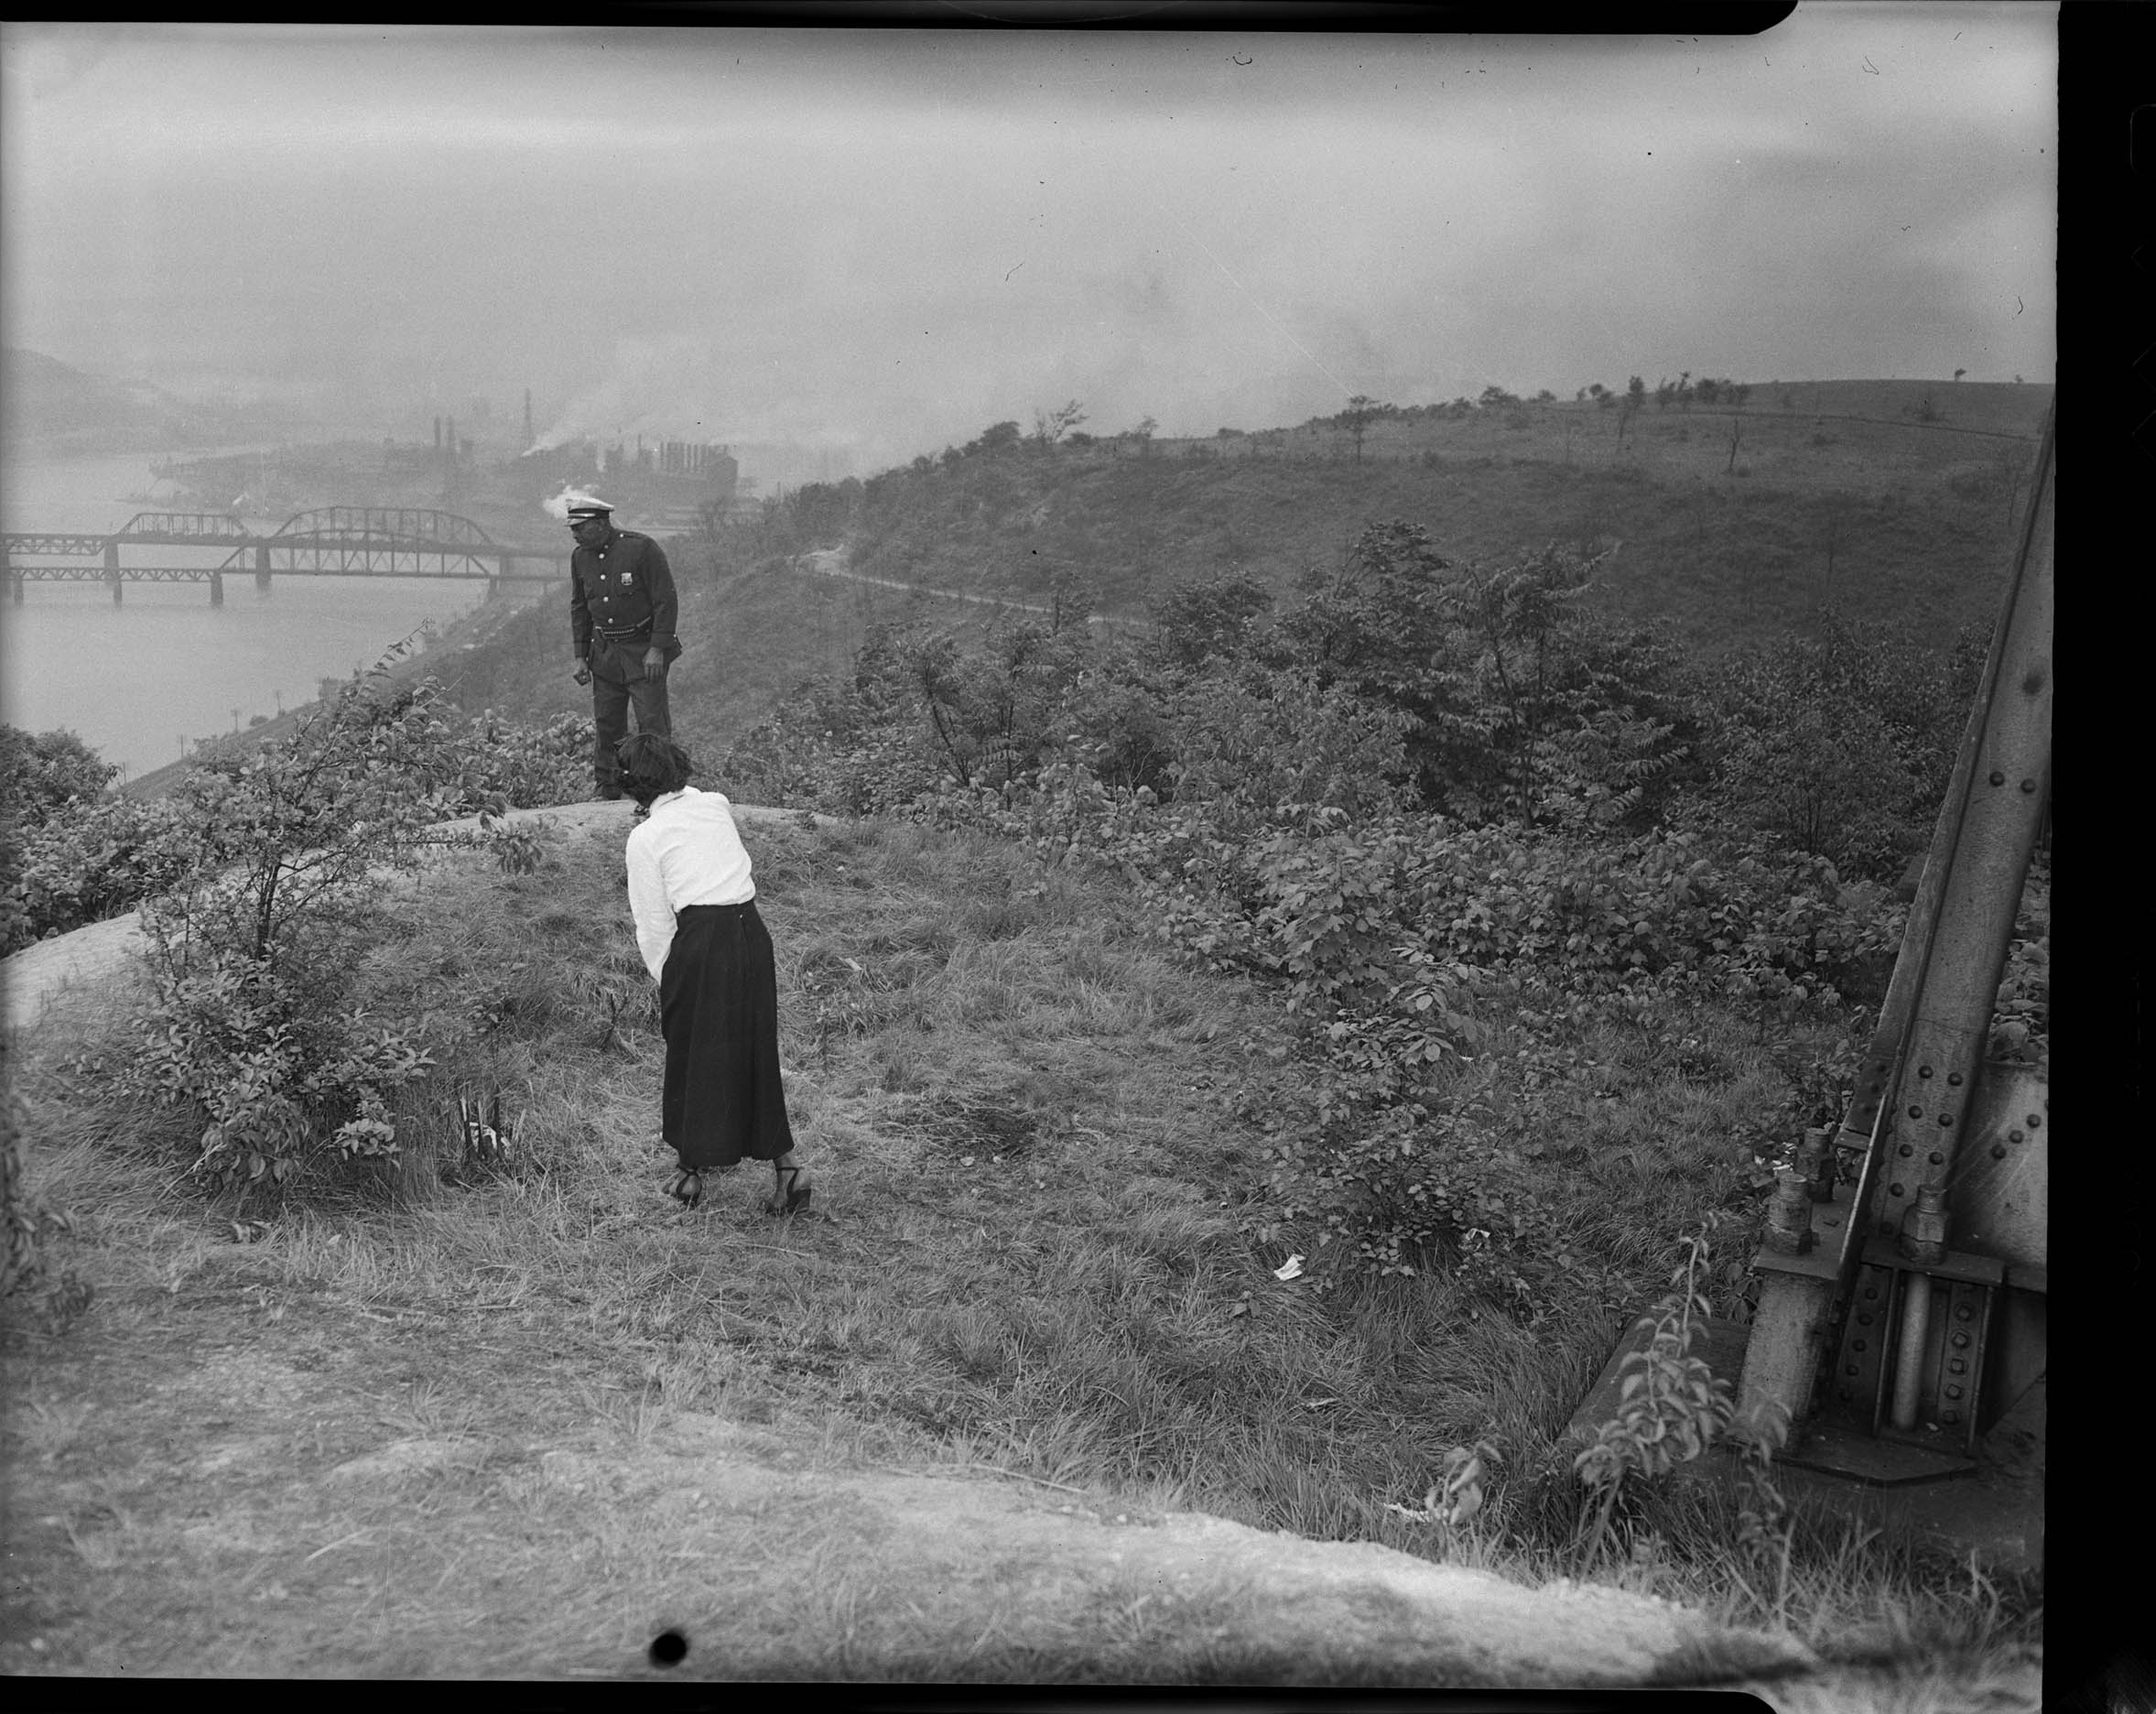 A police officer and a woman in a long skirt standing in a grassy area on top of a hill, looking over the edge of the hill